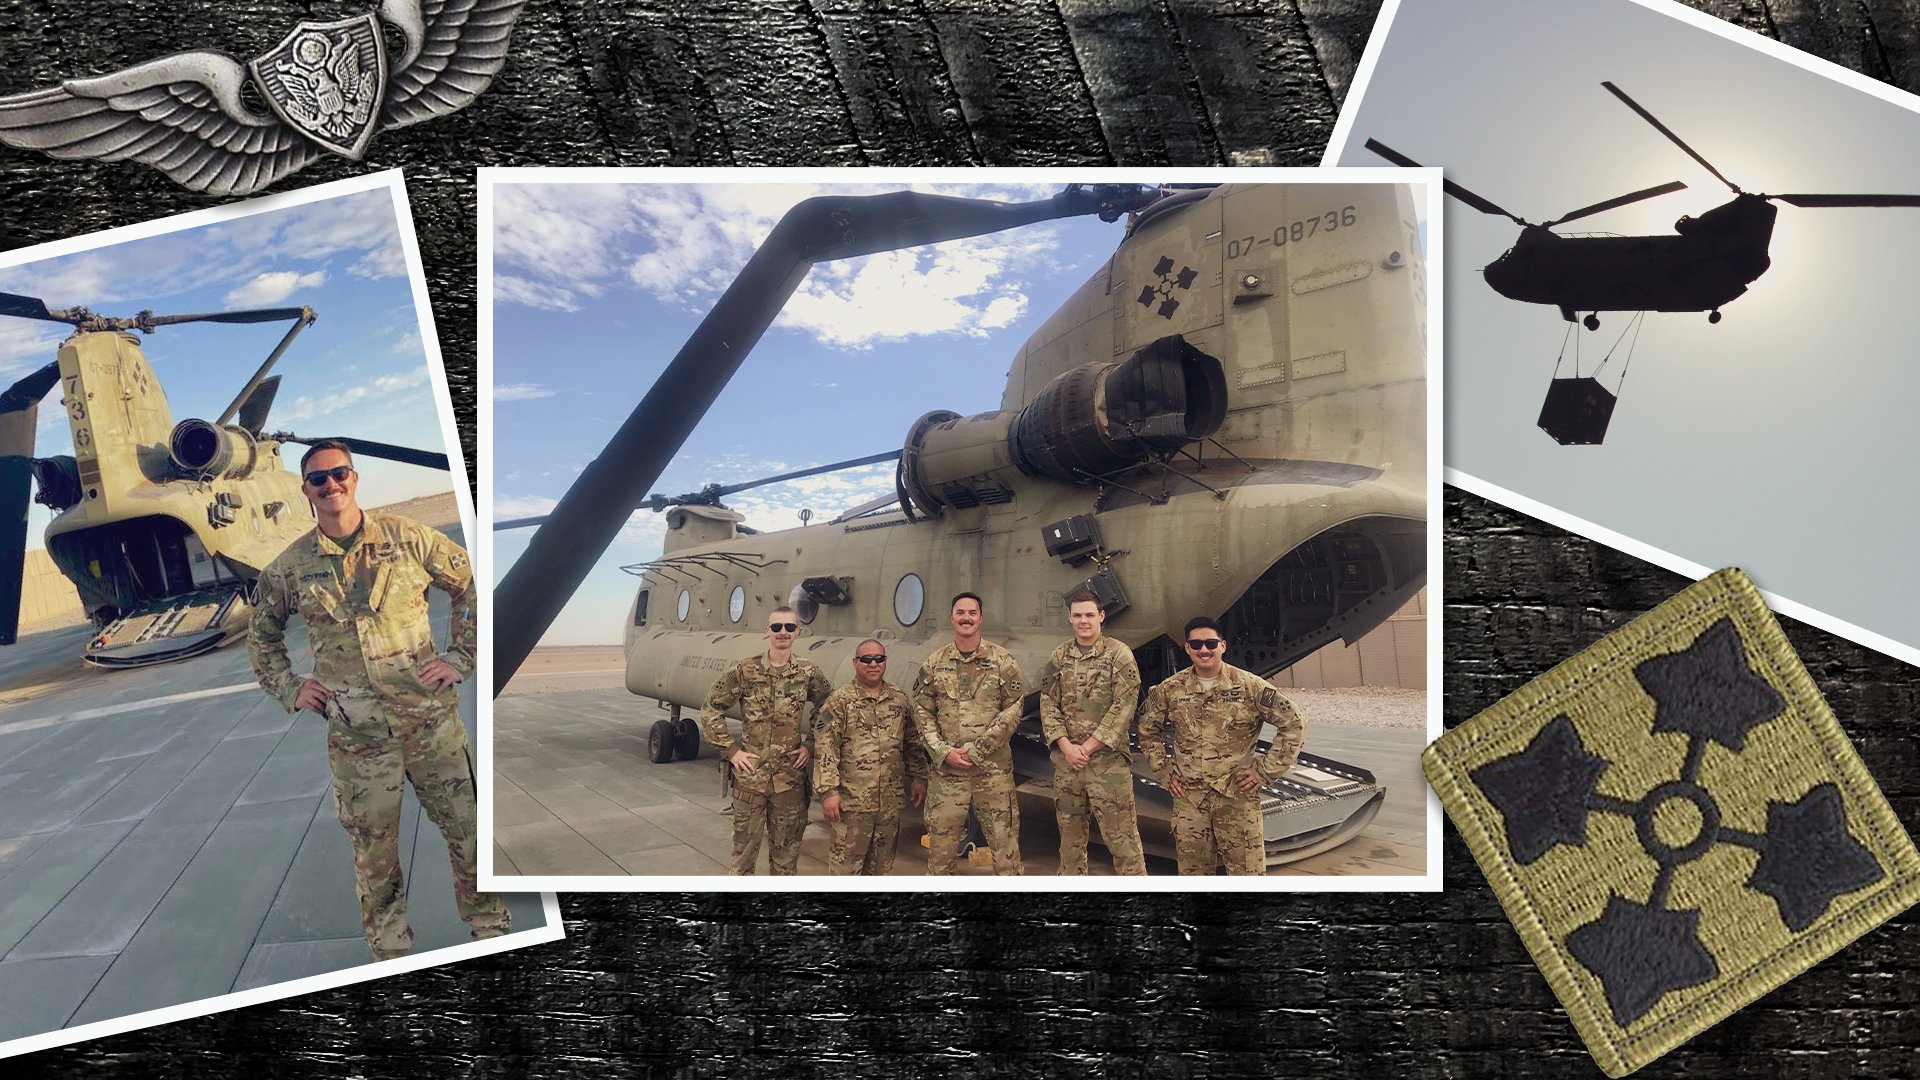 The crew of CASC 73 received the US Army Aviation Broken Wing Award for safely landing this CH-47 with severe rotor damage. Photos courtesy of Washington National Guard and Ryan Schwend. Composite by Coffee or Die Magazine.